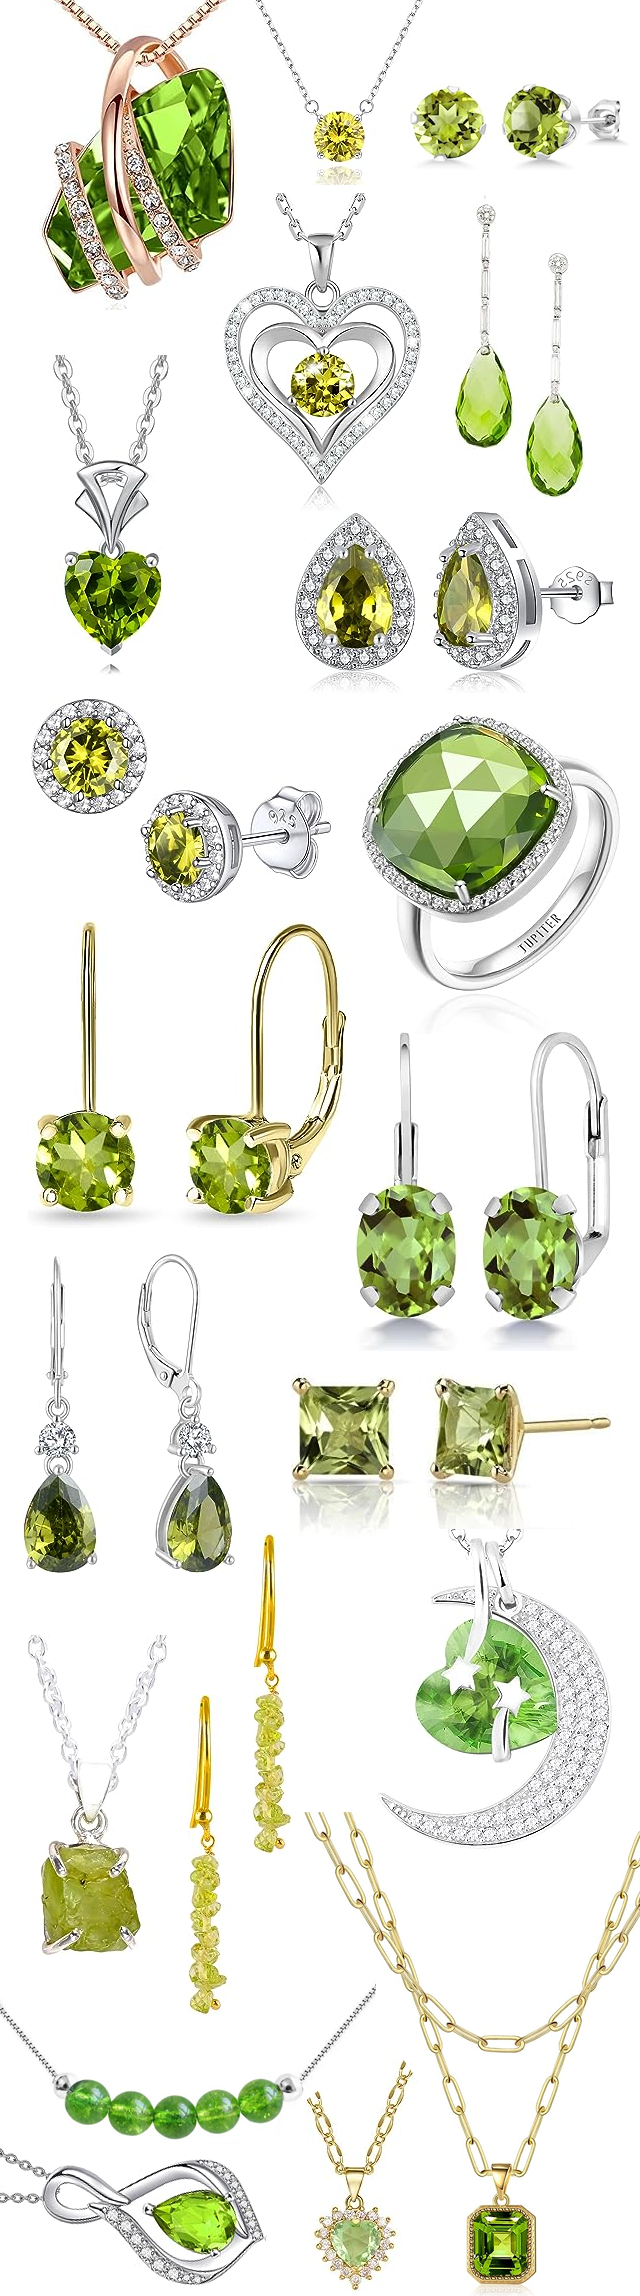 Different Colors of Peridot Gemstone